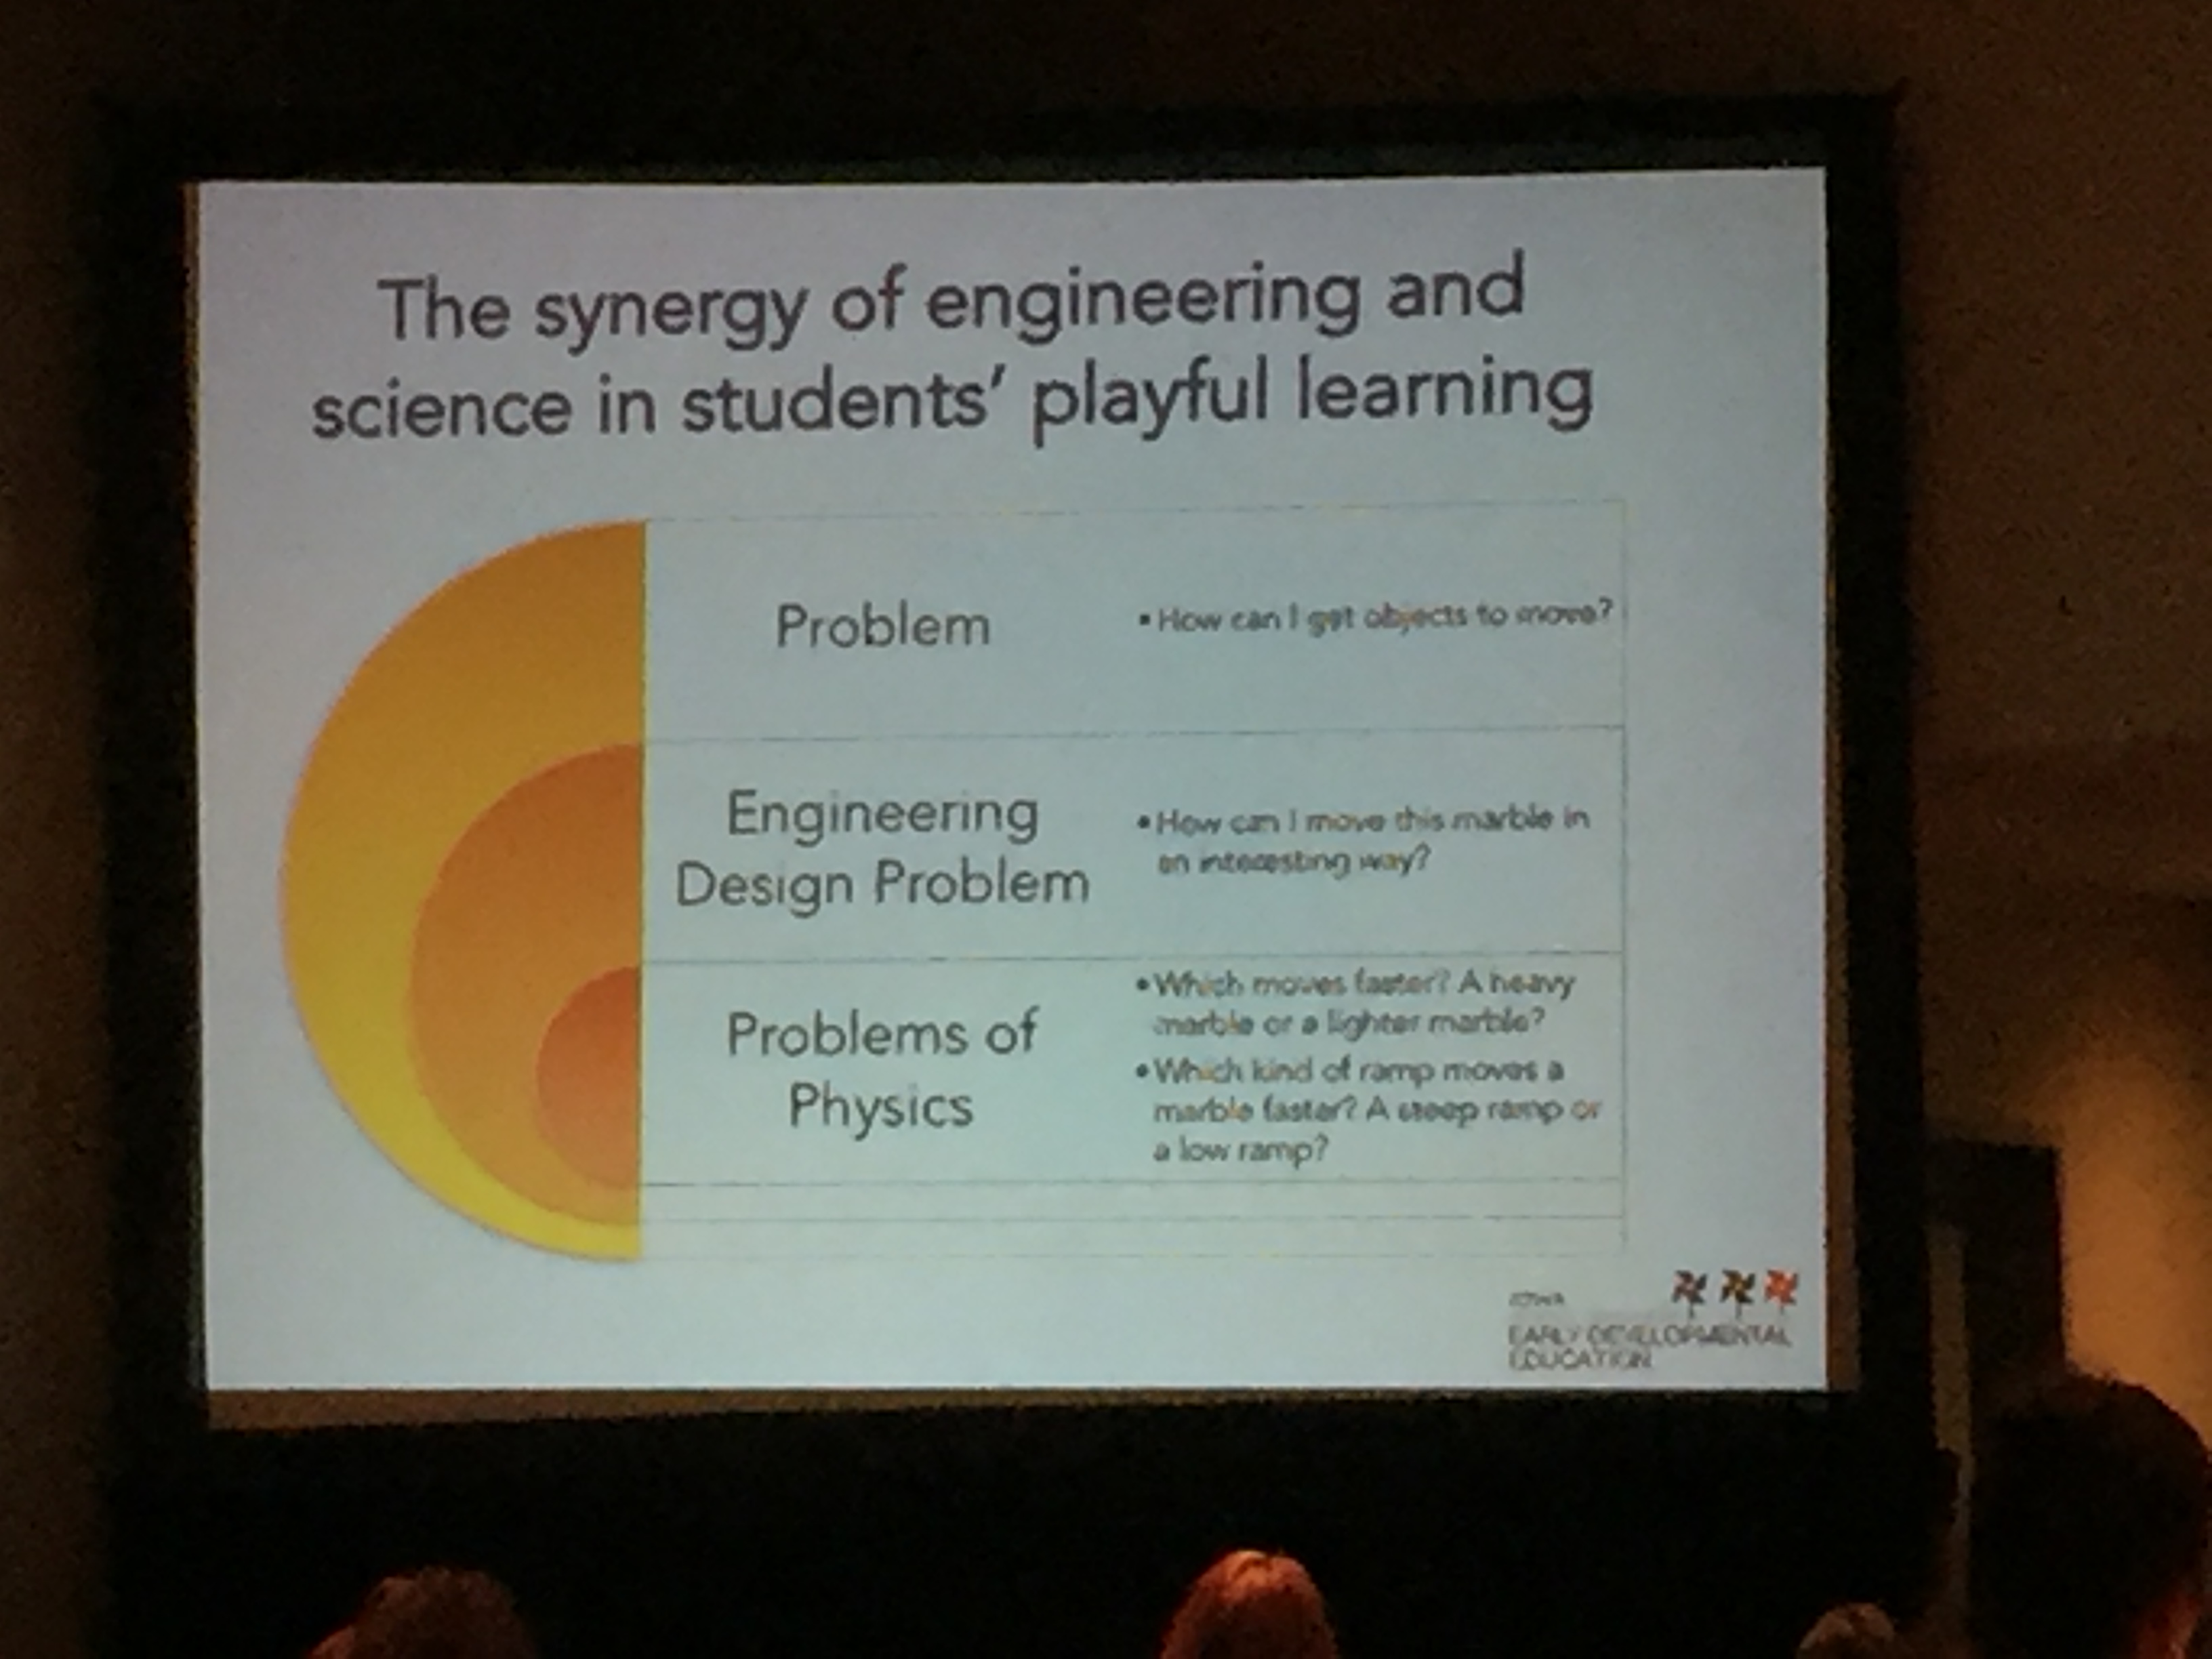 Slide on "the synergy of engineering and science in students' playful learning.